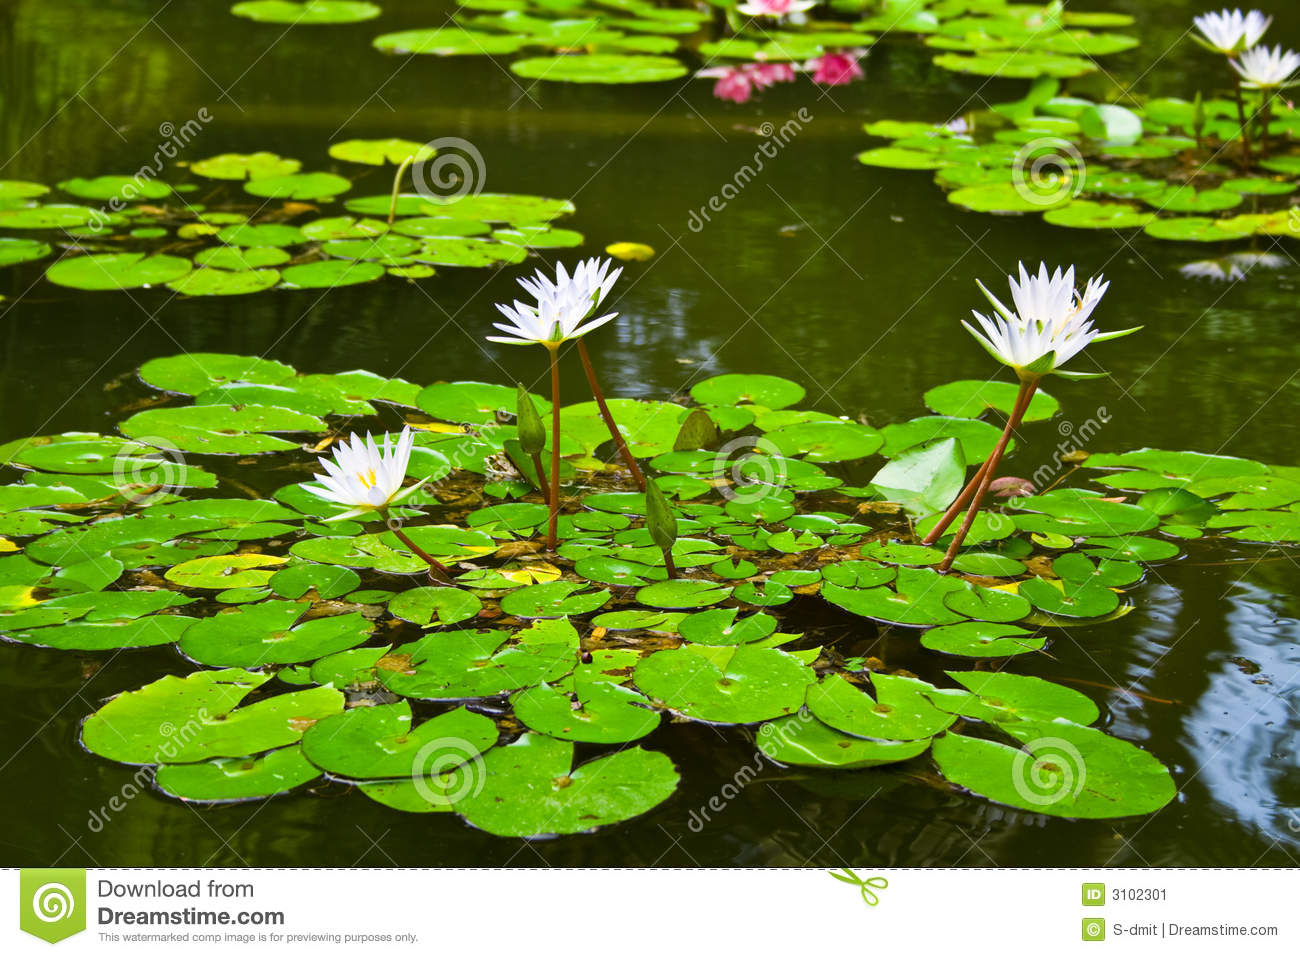 Water Lily In Pond Stock Image   Image  3102301